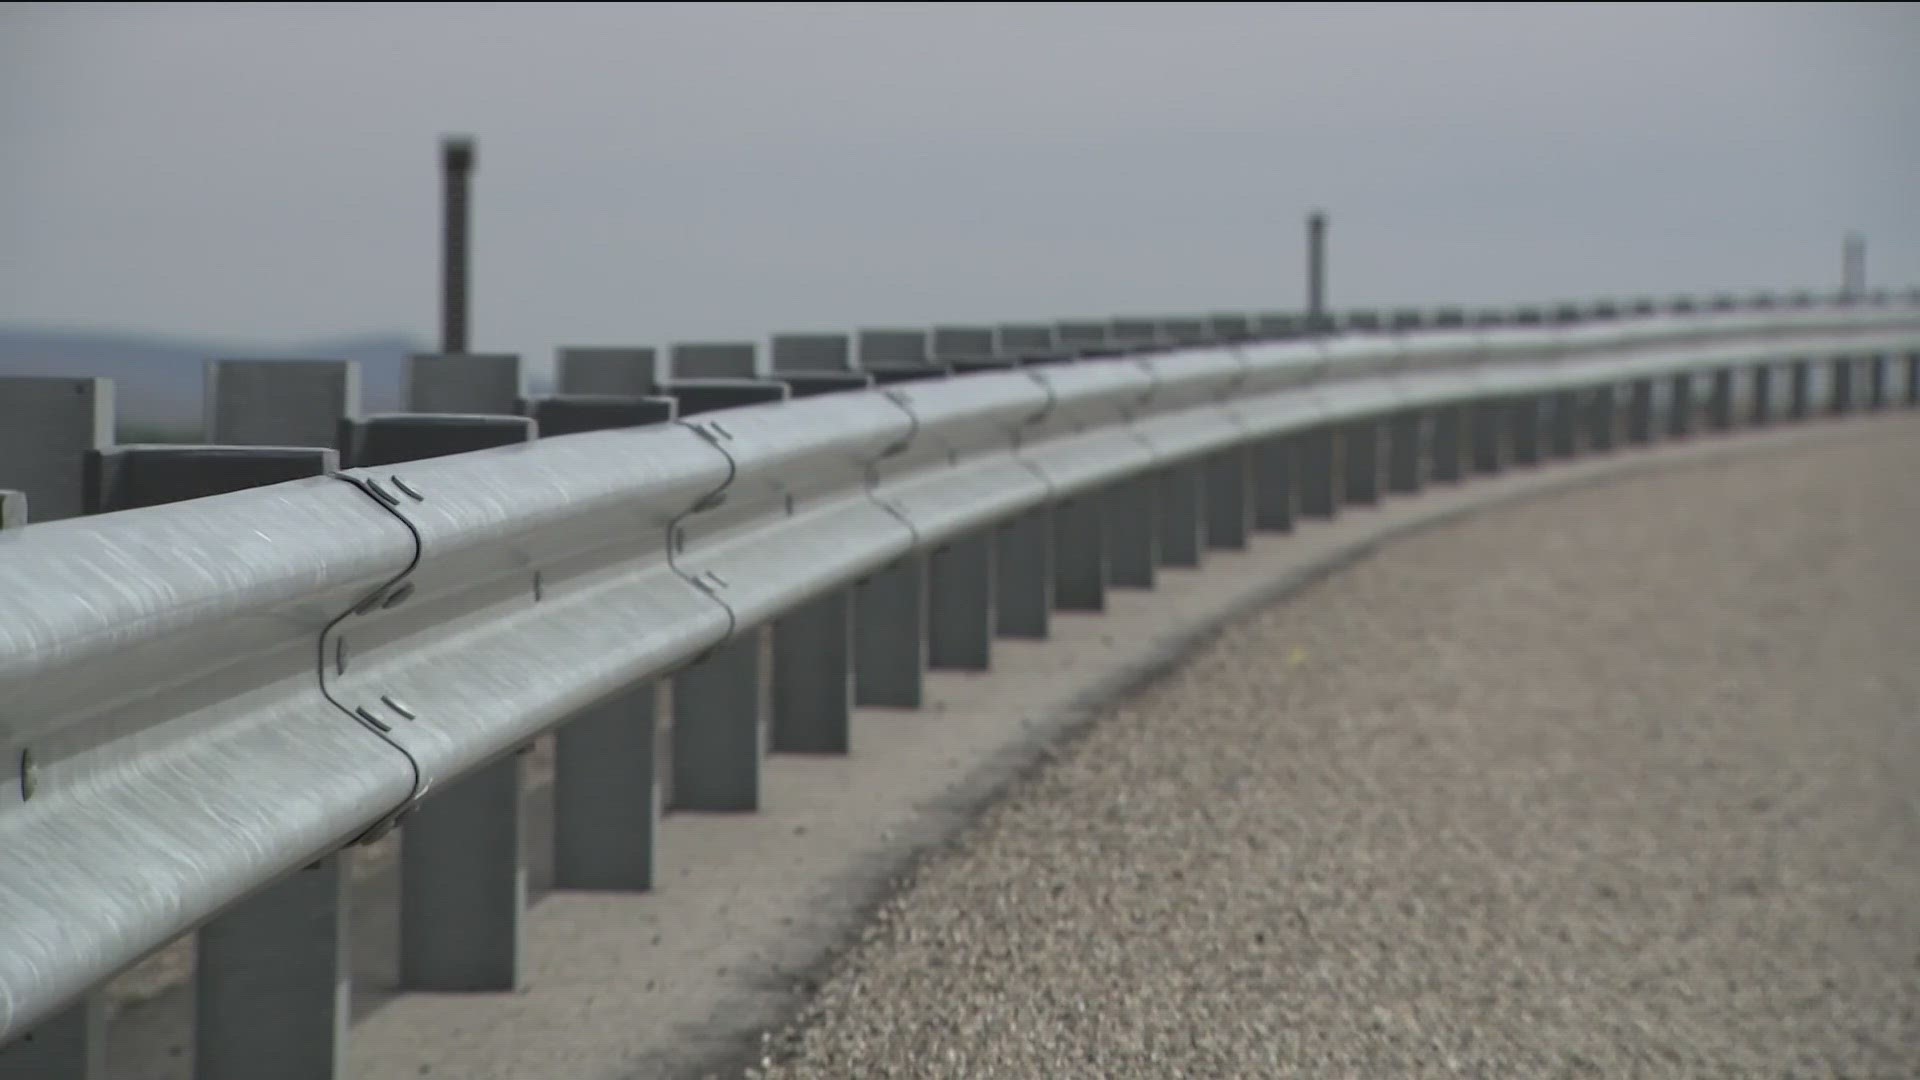 ITD said it hopes to have all the guardrail terminals fixed by winter.